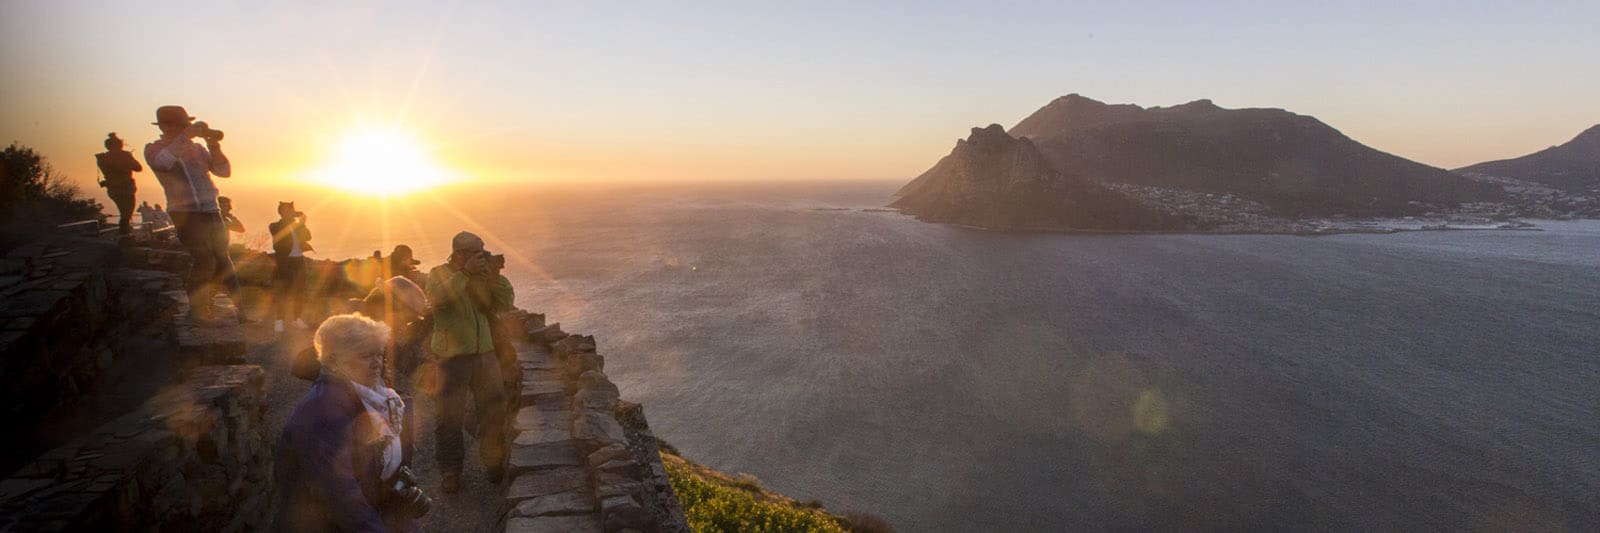 Overview Of Our Recent Cape Town Photography Tour